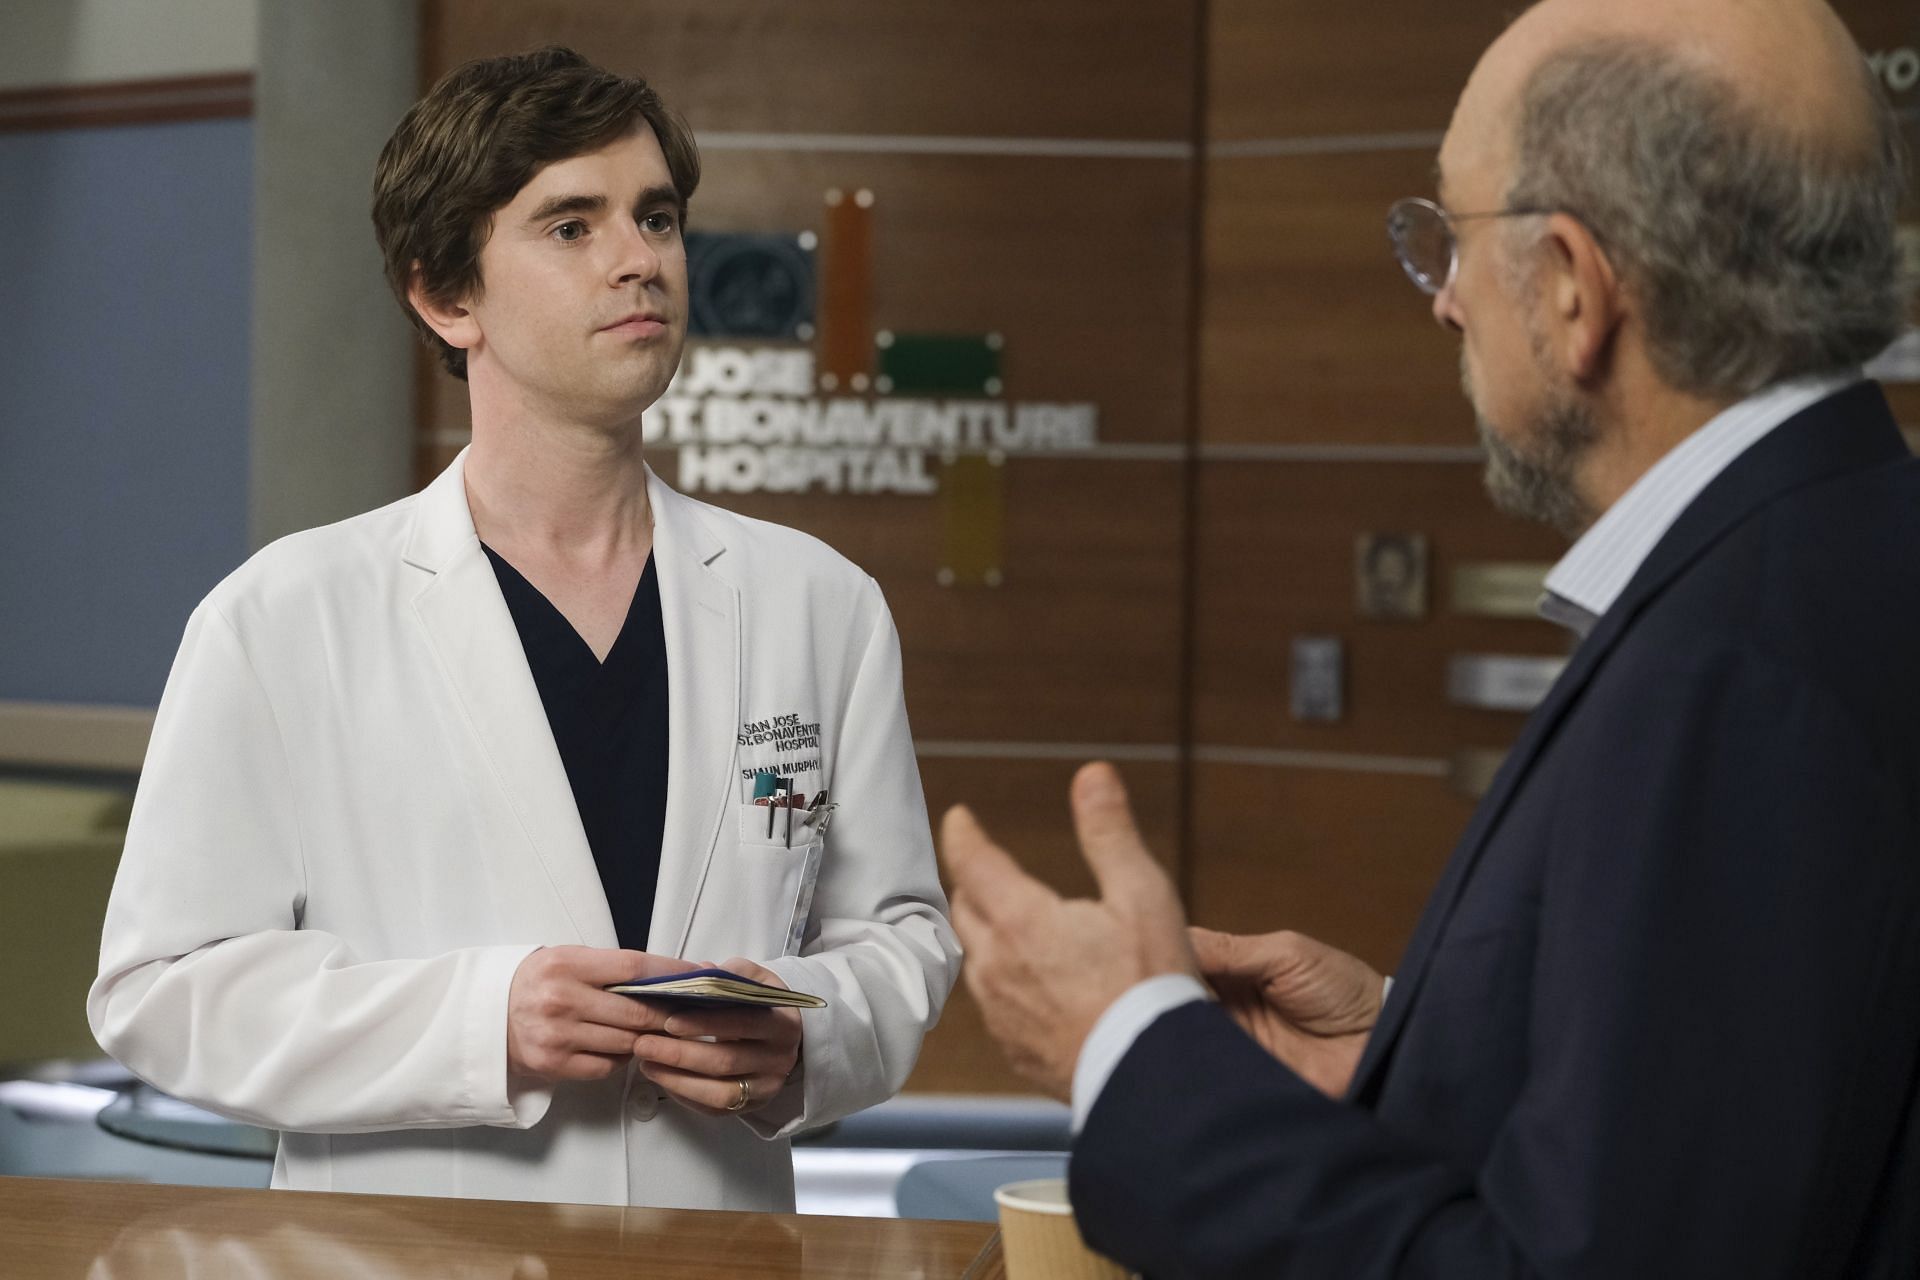 The Good Doctor season 6 episode 10 release date, air time, plot, and more